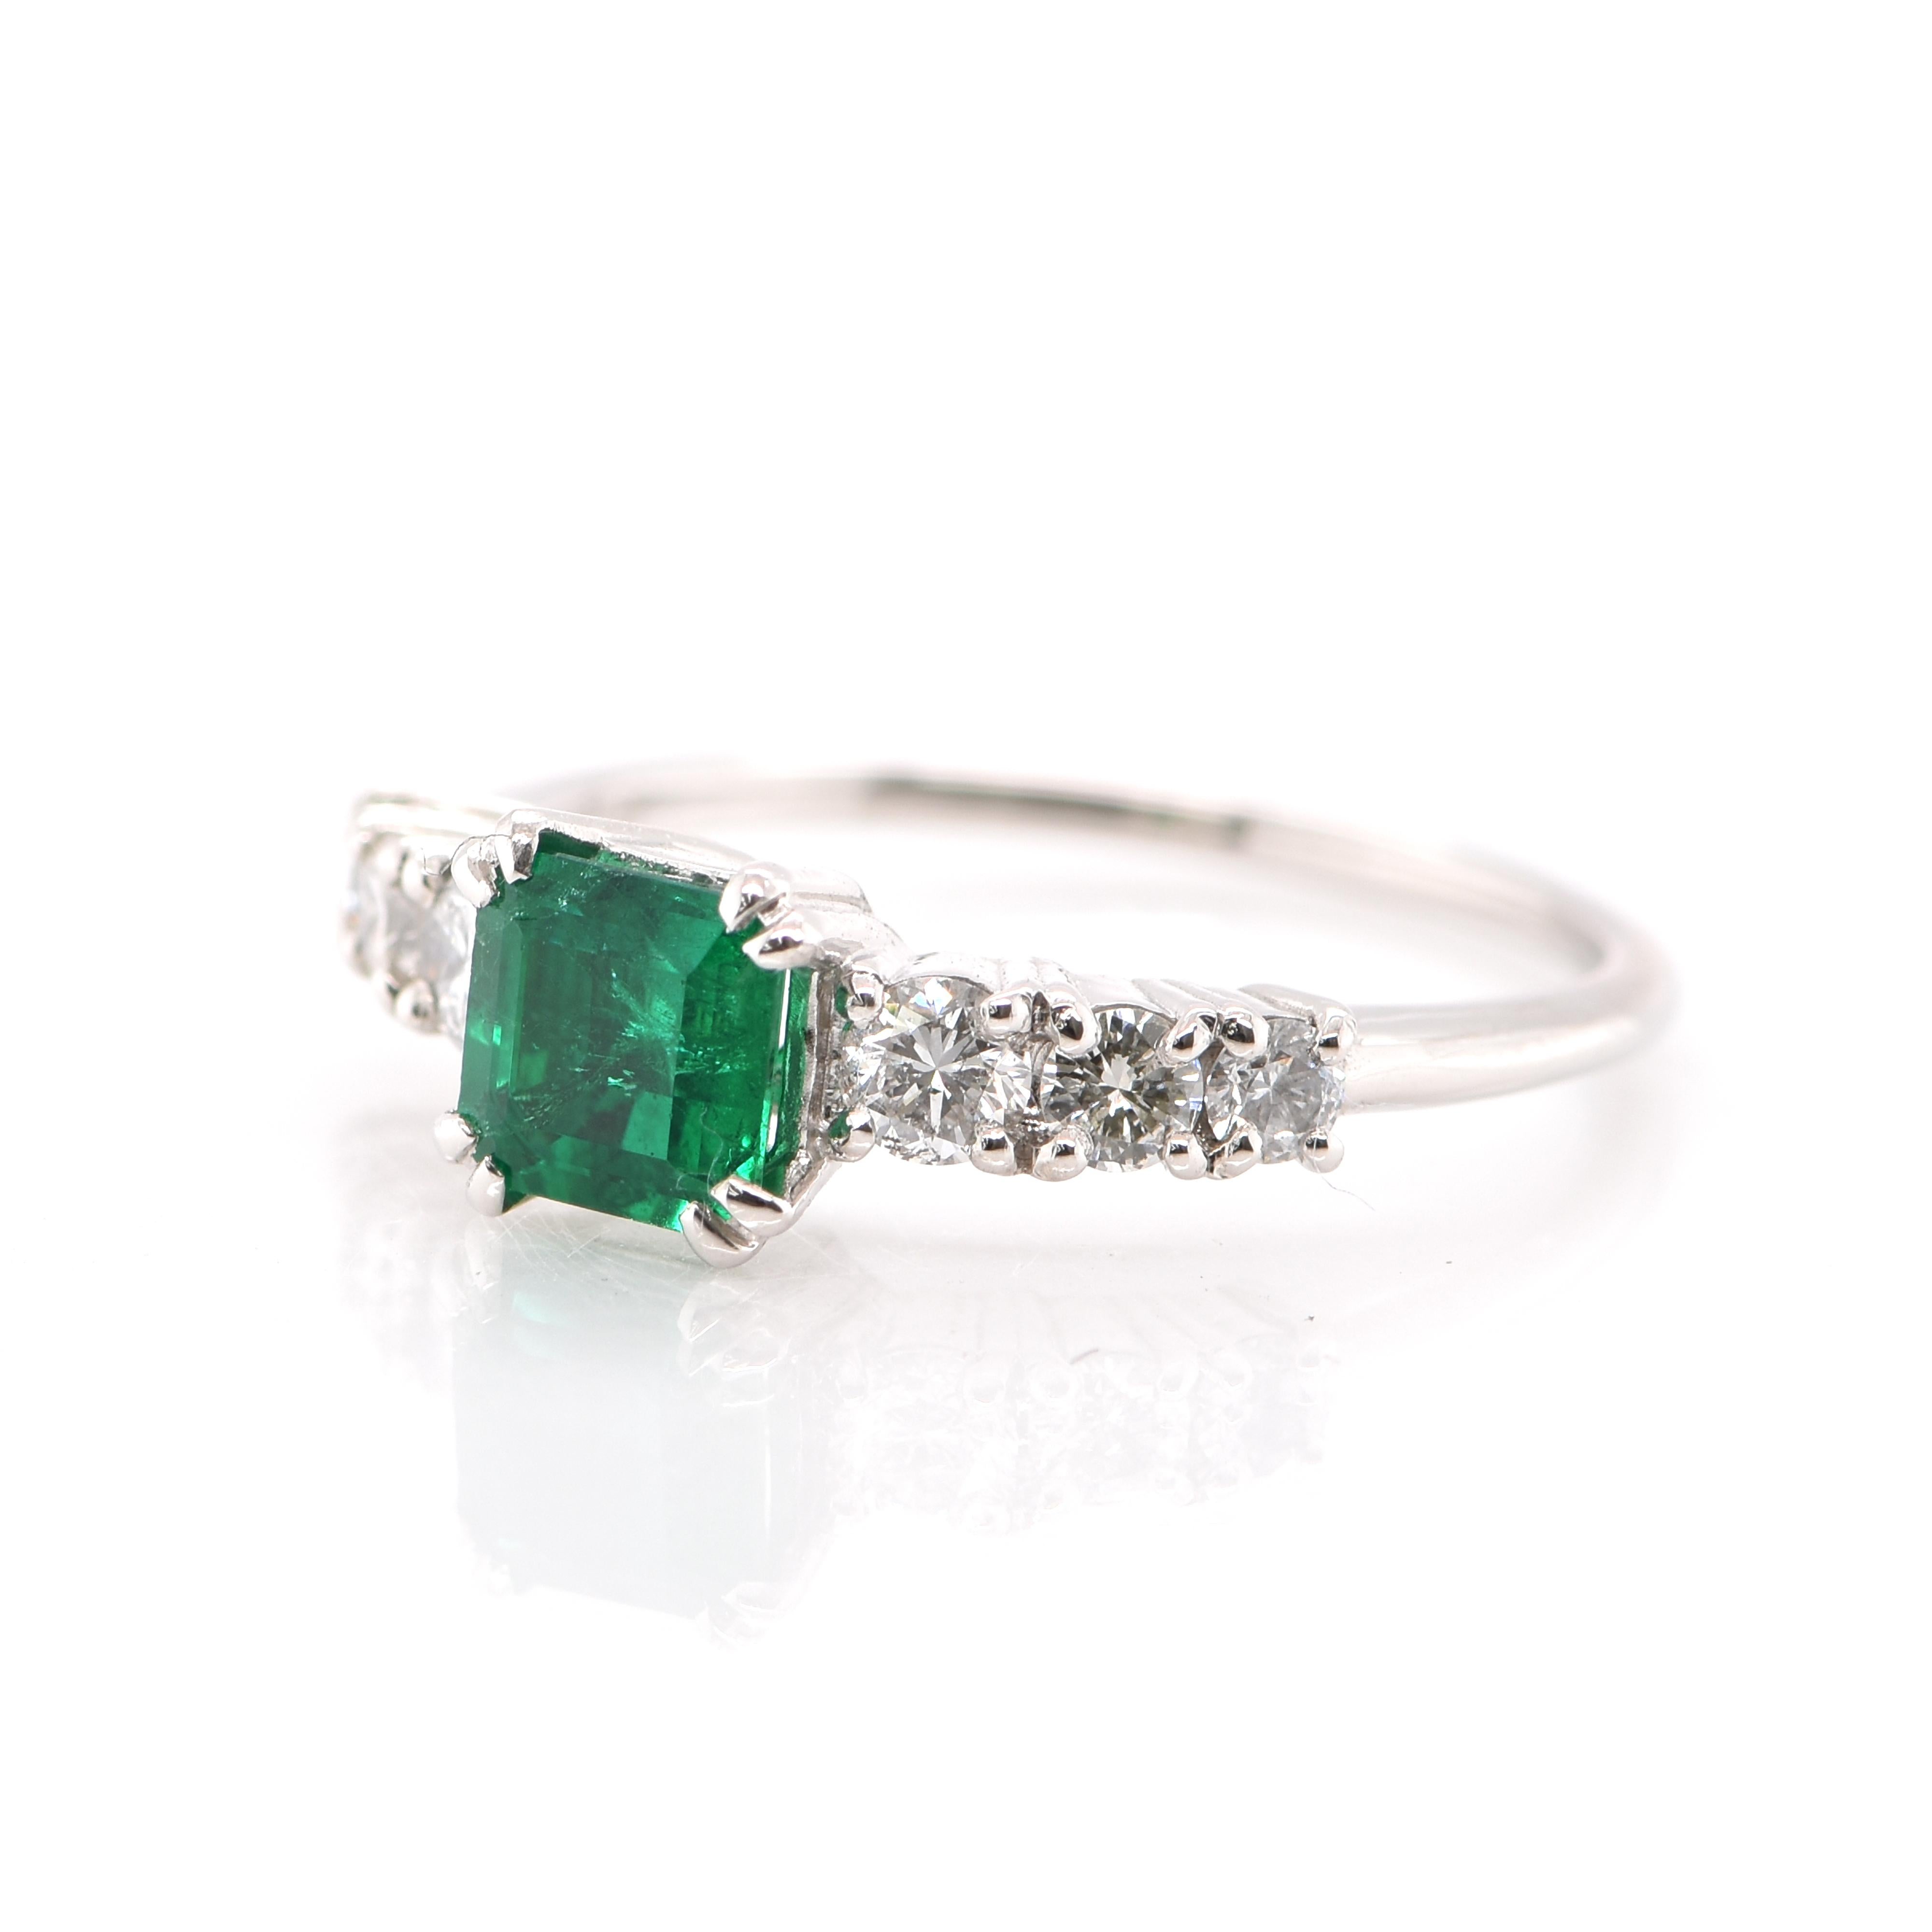 A stunning Engagement Ring featuring a 0.74 Carat Natural Emerald and 0.41 Carats of Diamond Accents set in Platinum. People have admired emerald’s green for thousands of years. Emeralds have always been associated with the lushest landscapes and